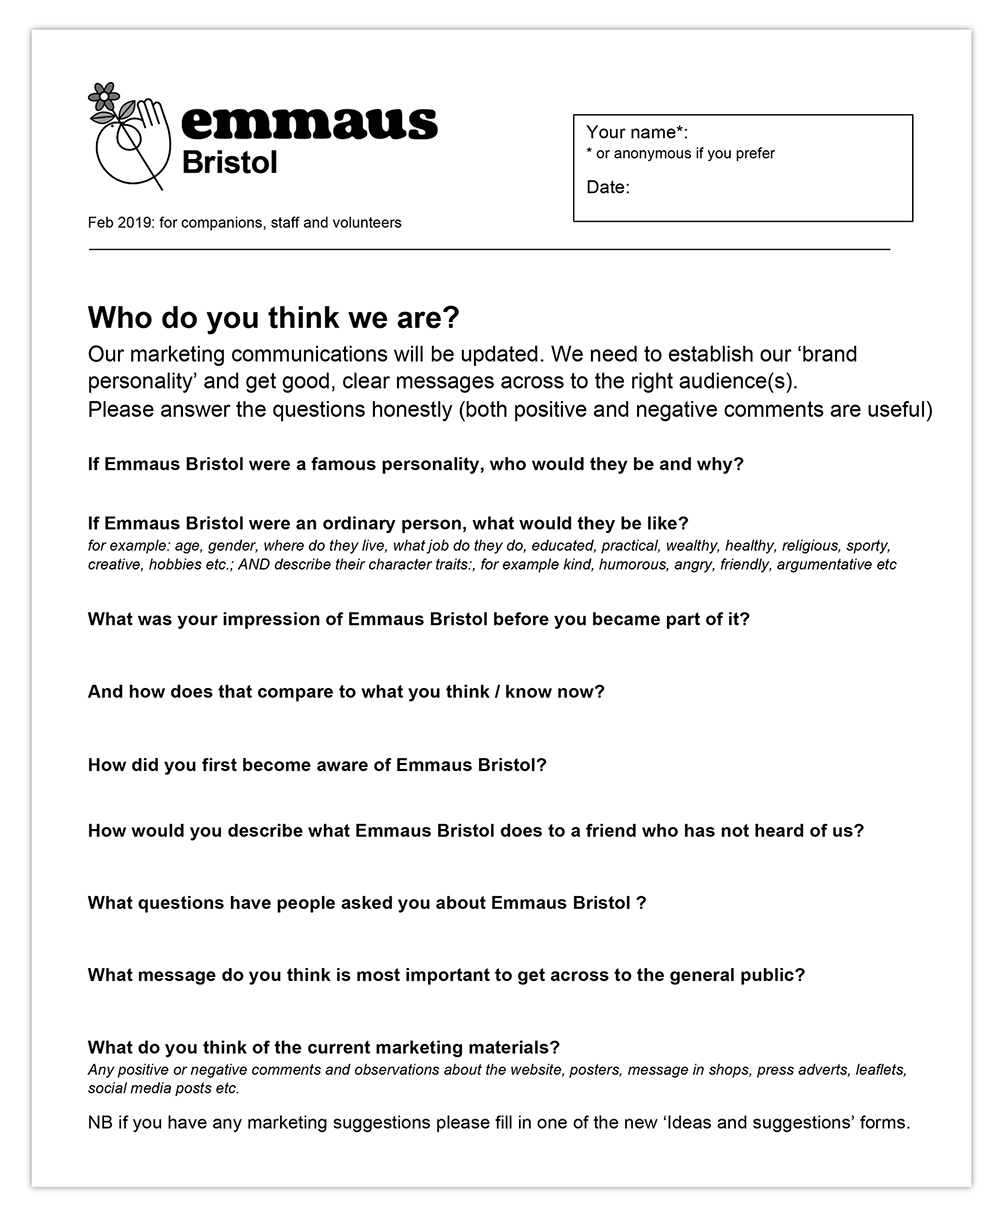 questionnaire informing brand and communications developments